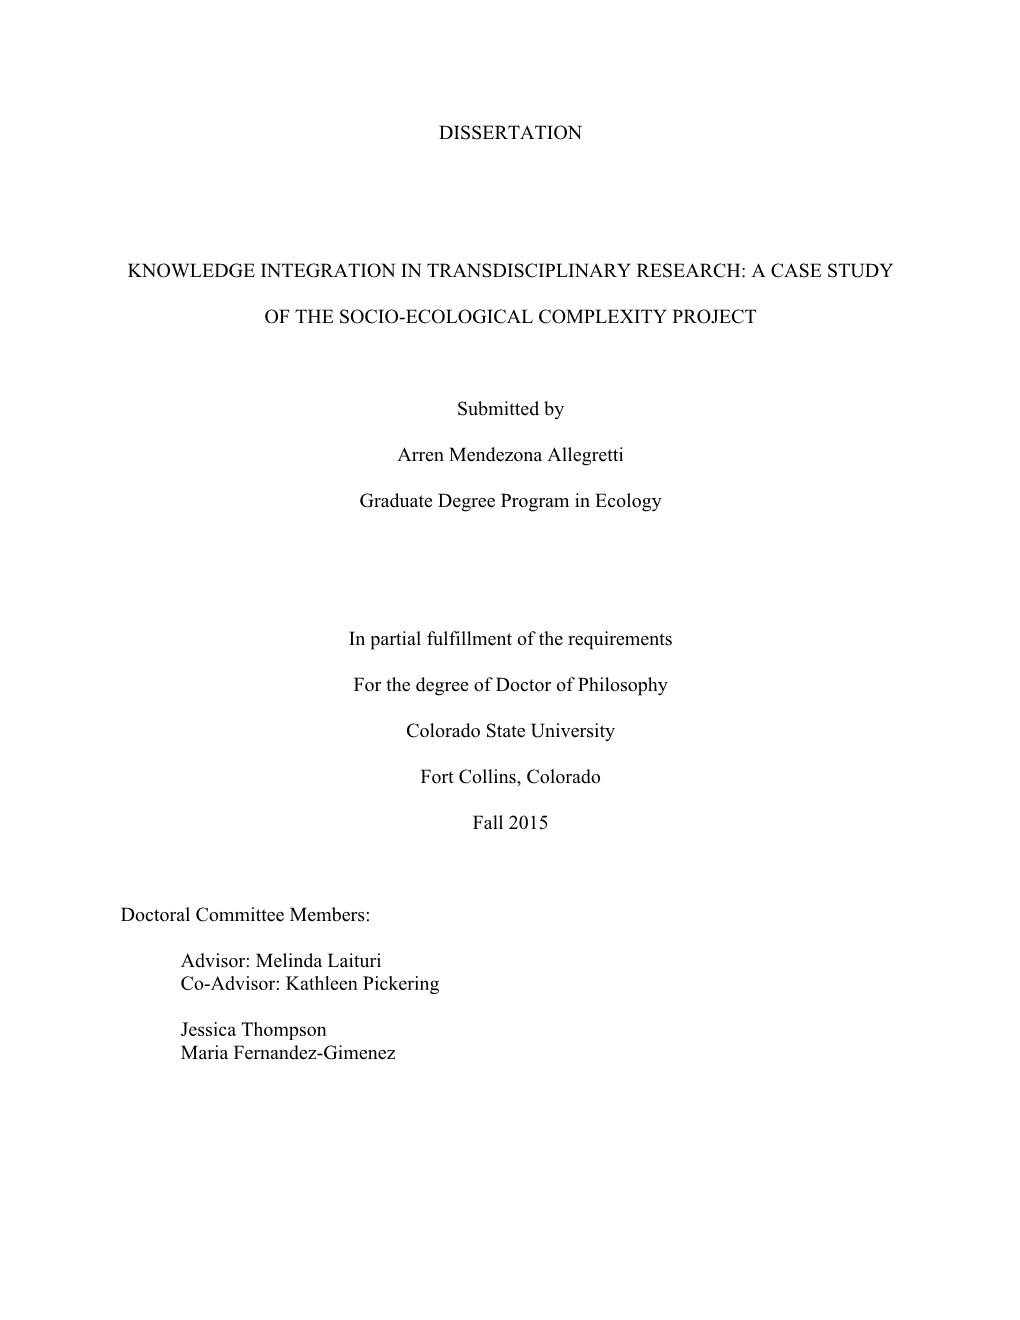 AMA Dissertation Final Formatted Resubmission